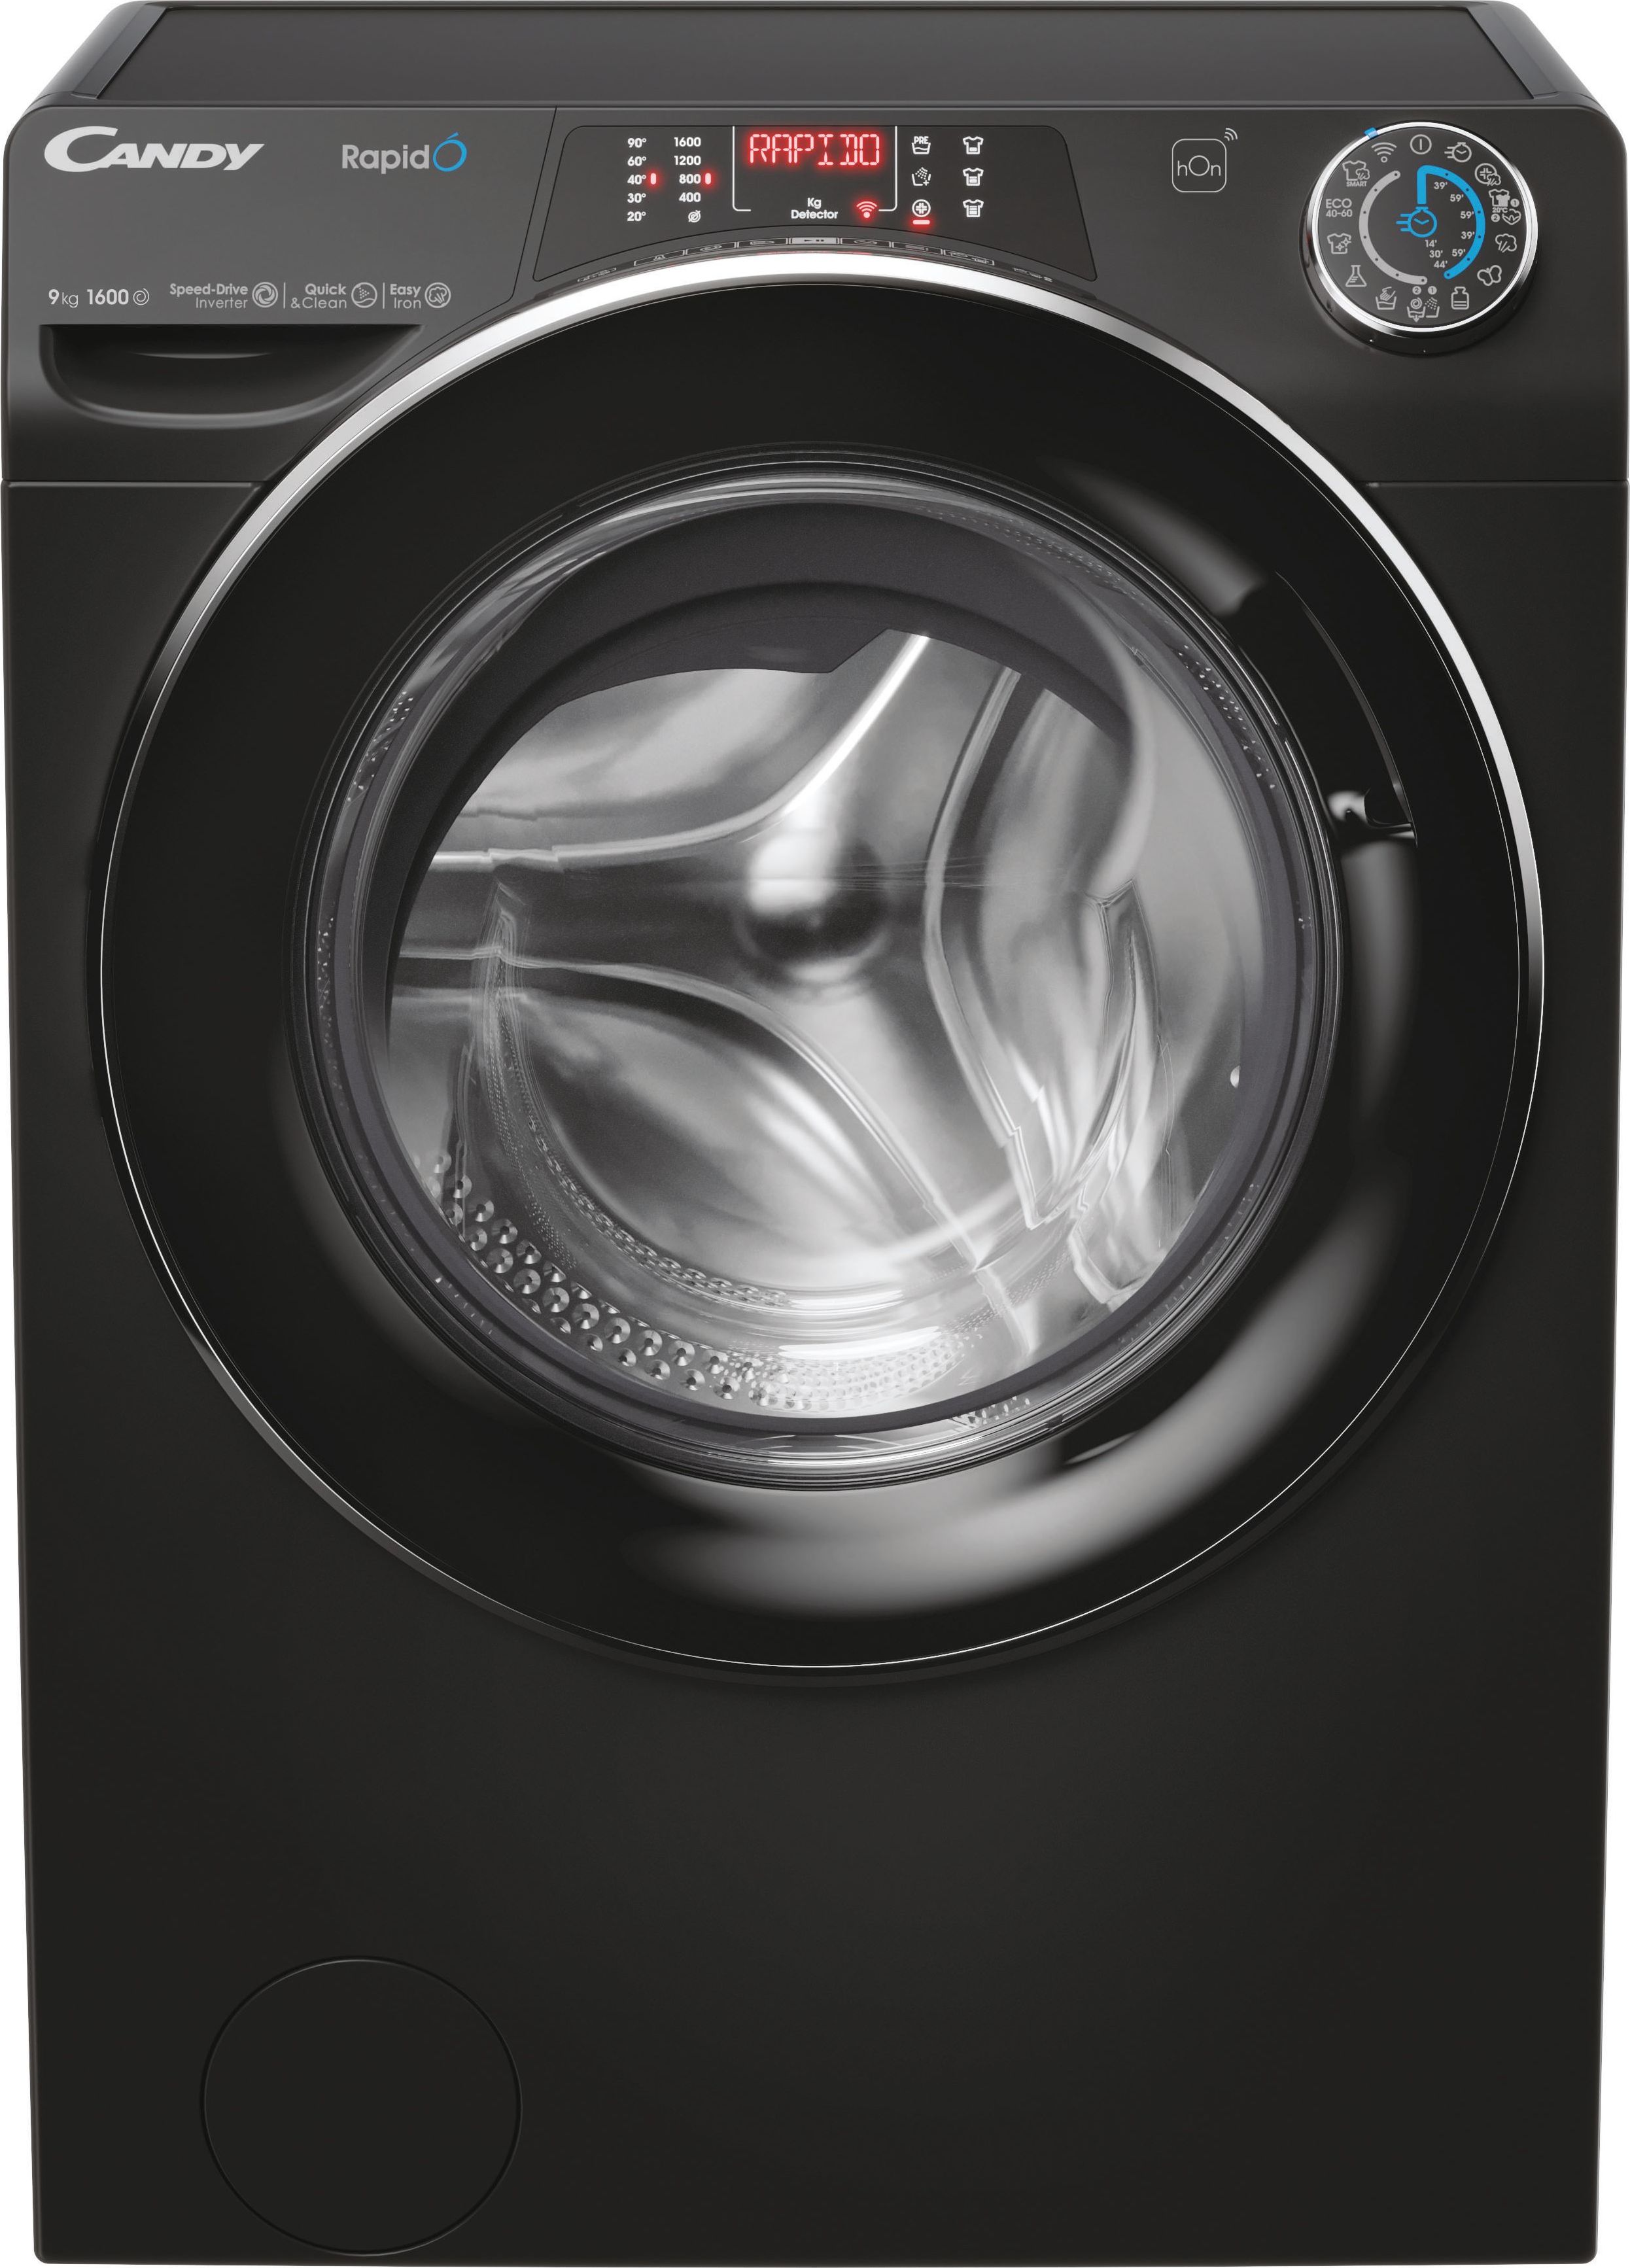 Candy Rapid RO1696DWMCB7-80 9kg Washing Machine with 1600 rpm - Black - A Rated, Black